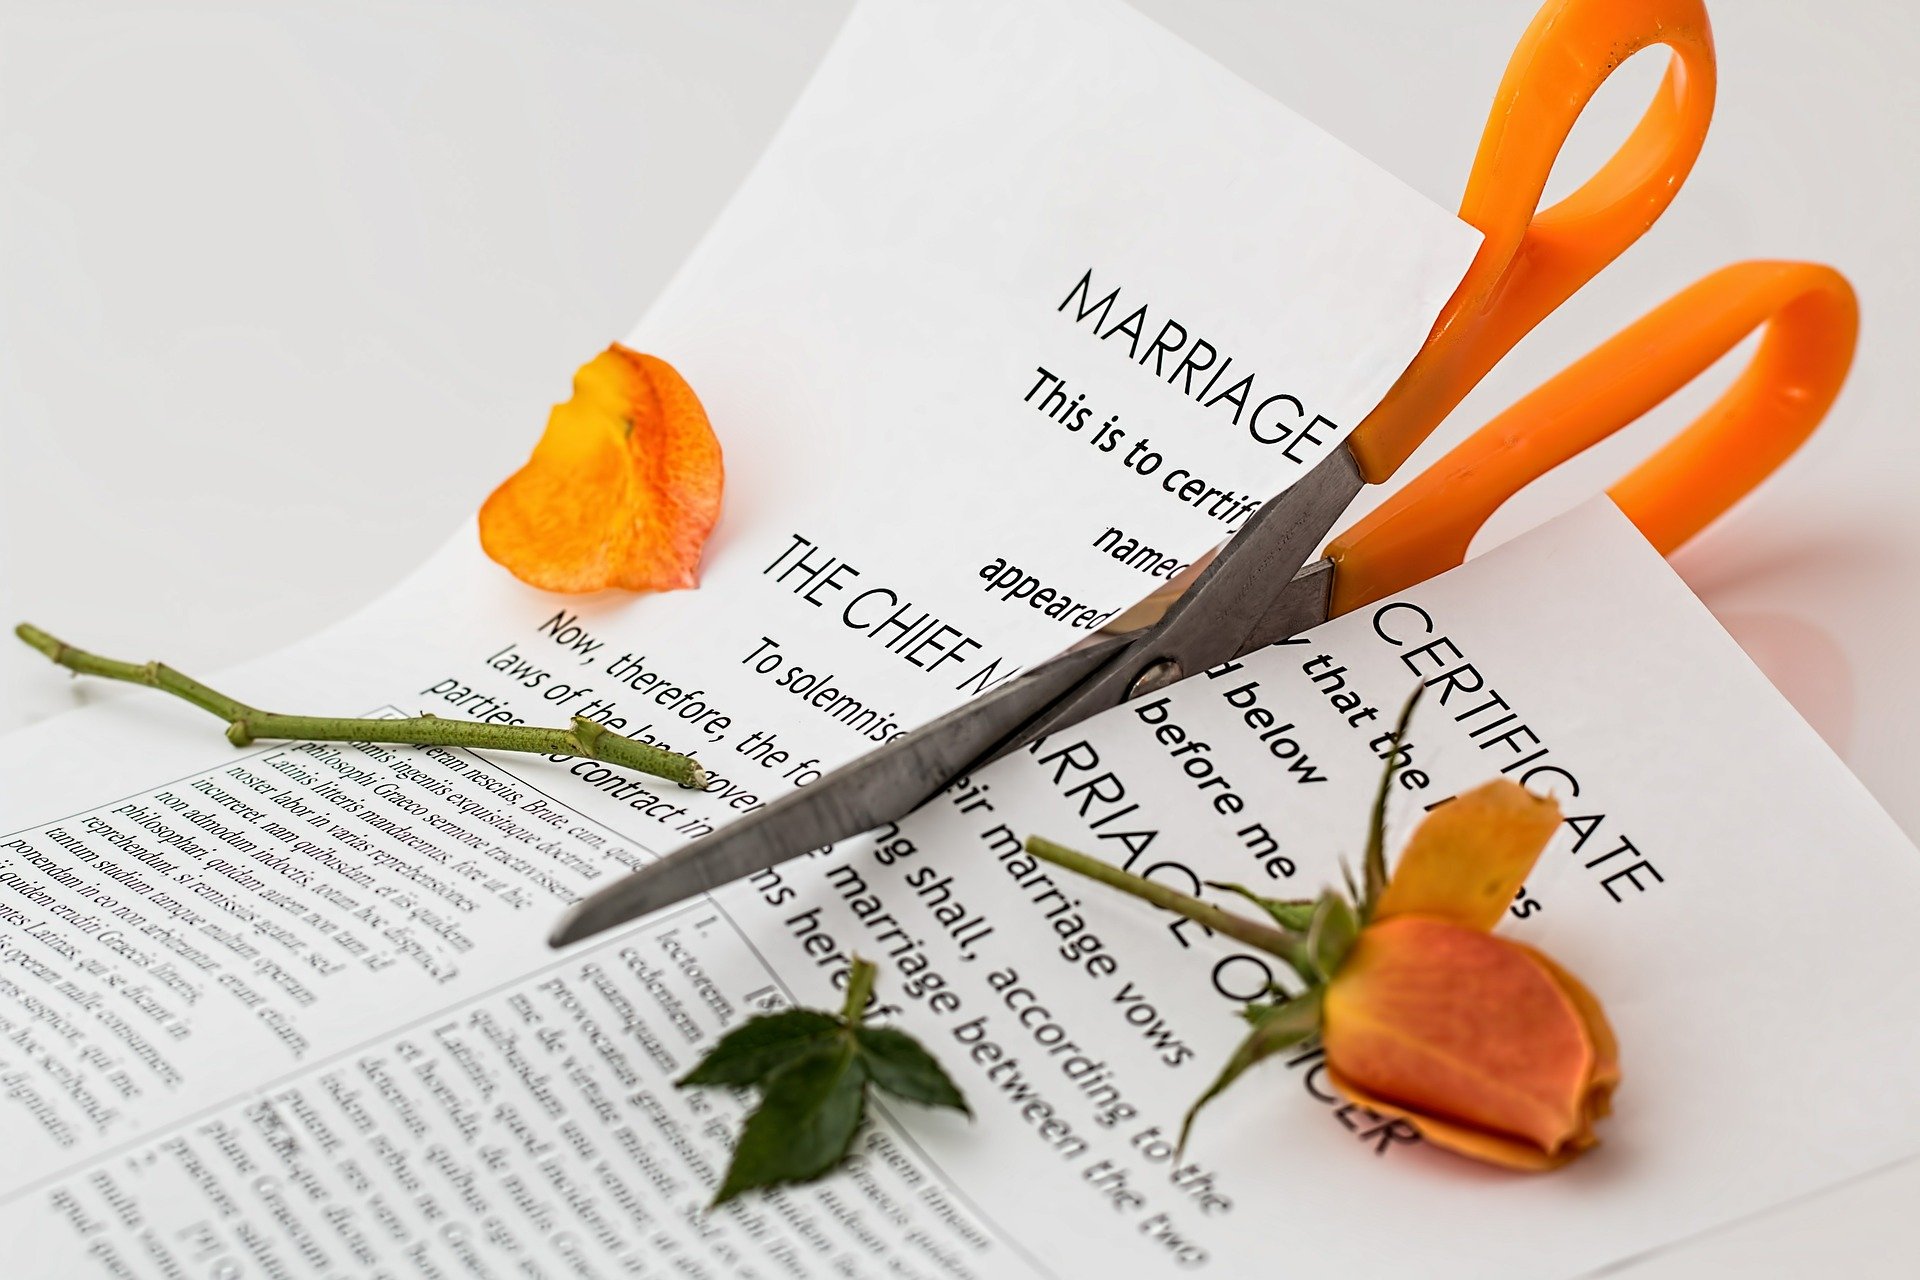 marriage certificate and rose being cut in half with scissors